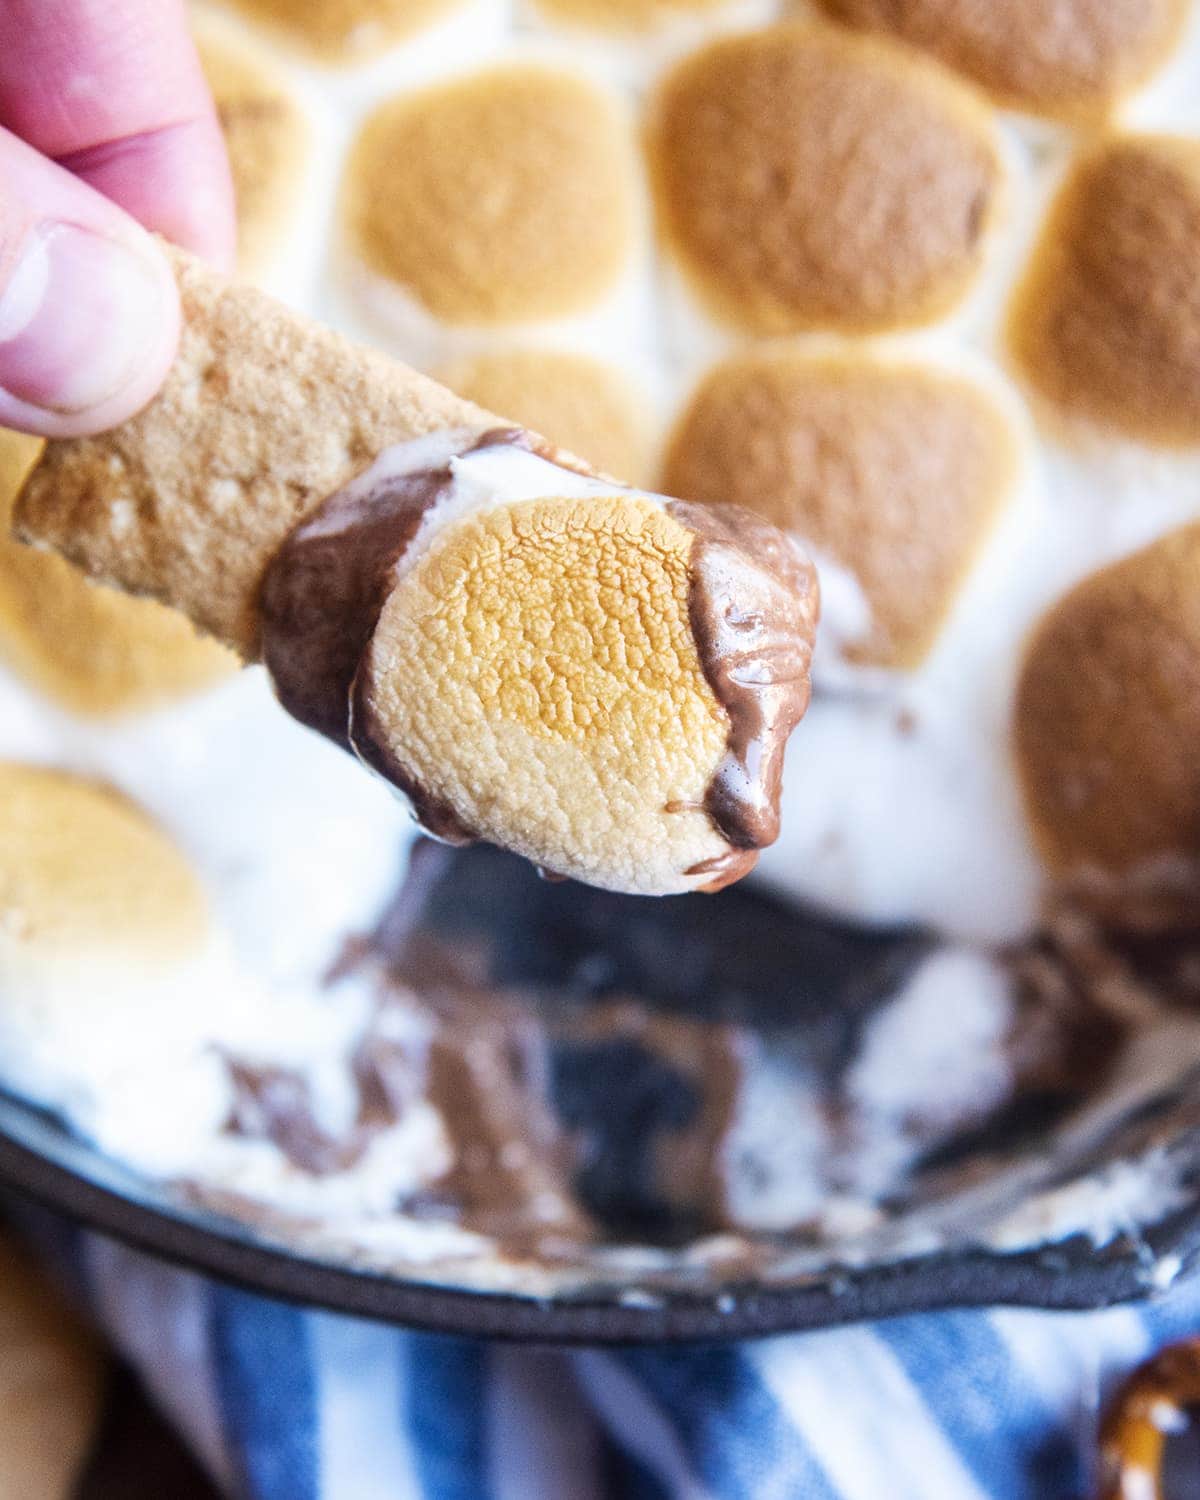 A piece of a graham cracker with chocolate and a toasted marshmallow on it, being held by a hand.